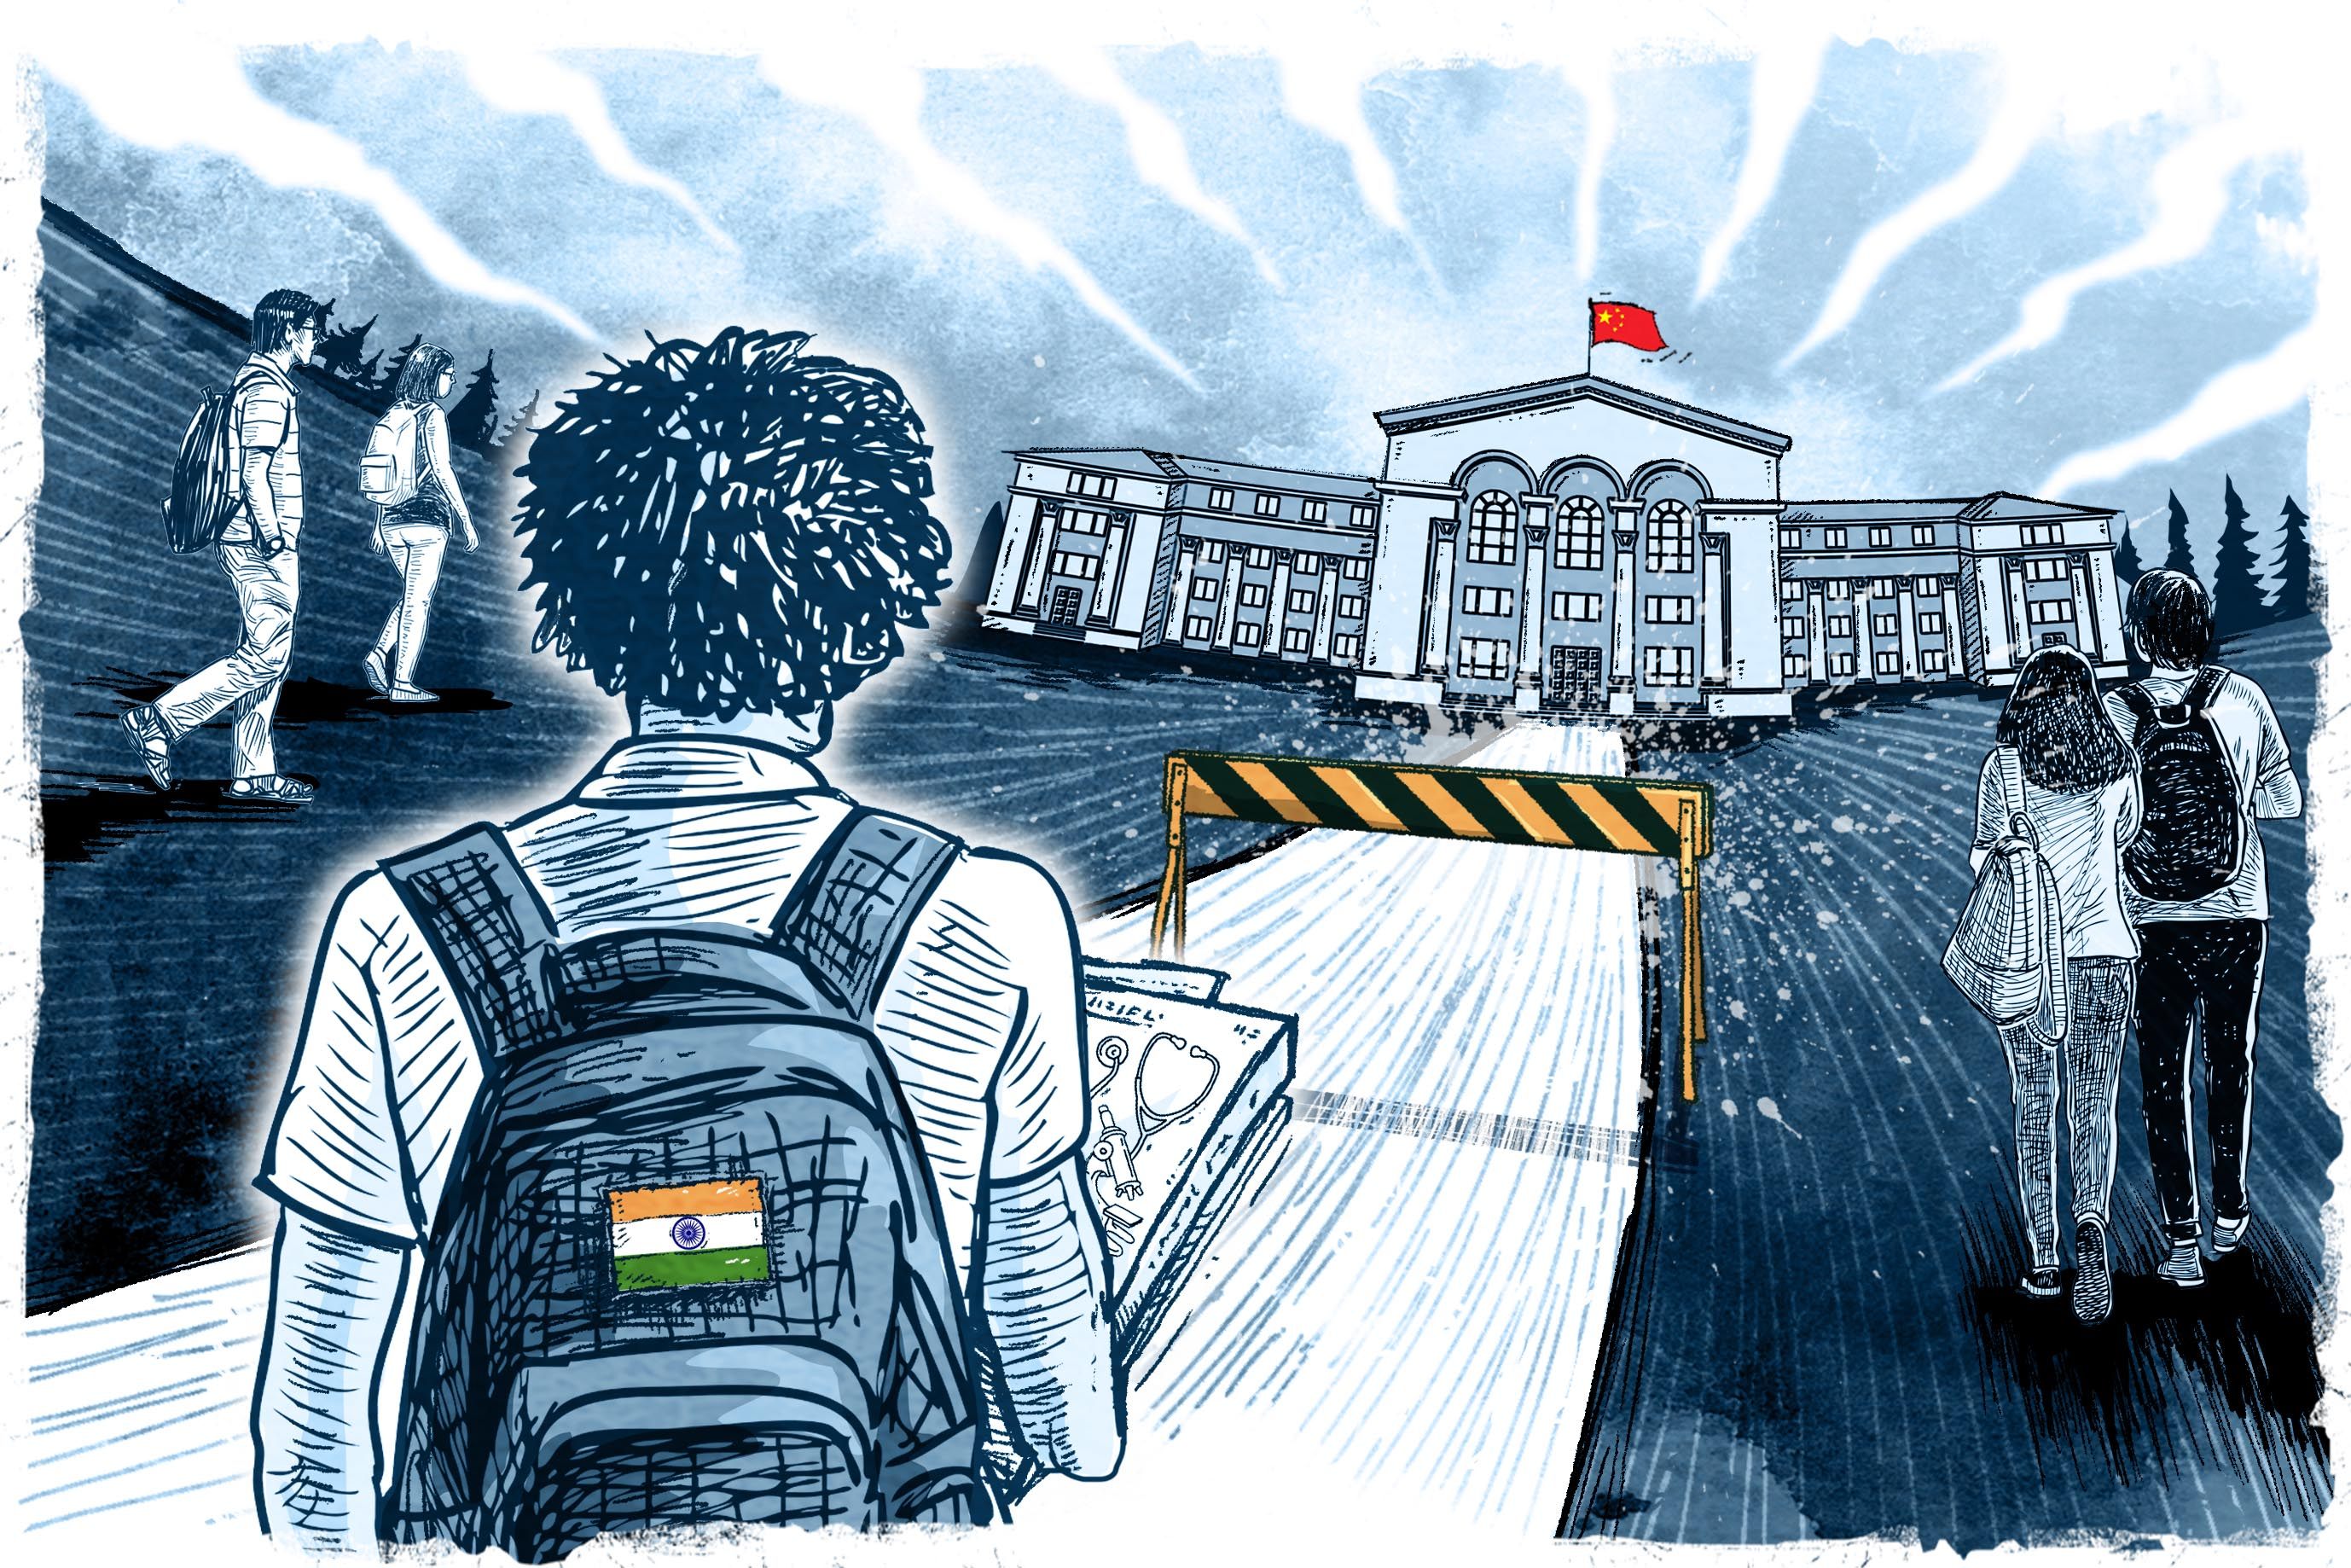 Around 20,000 Indian students are enrolled in Chinese universities, with the vast majority studying medicine. Illustration: Henry Wong